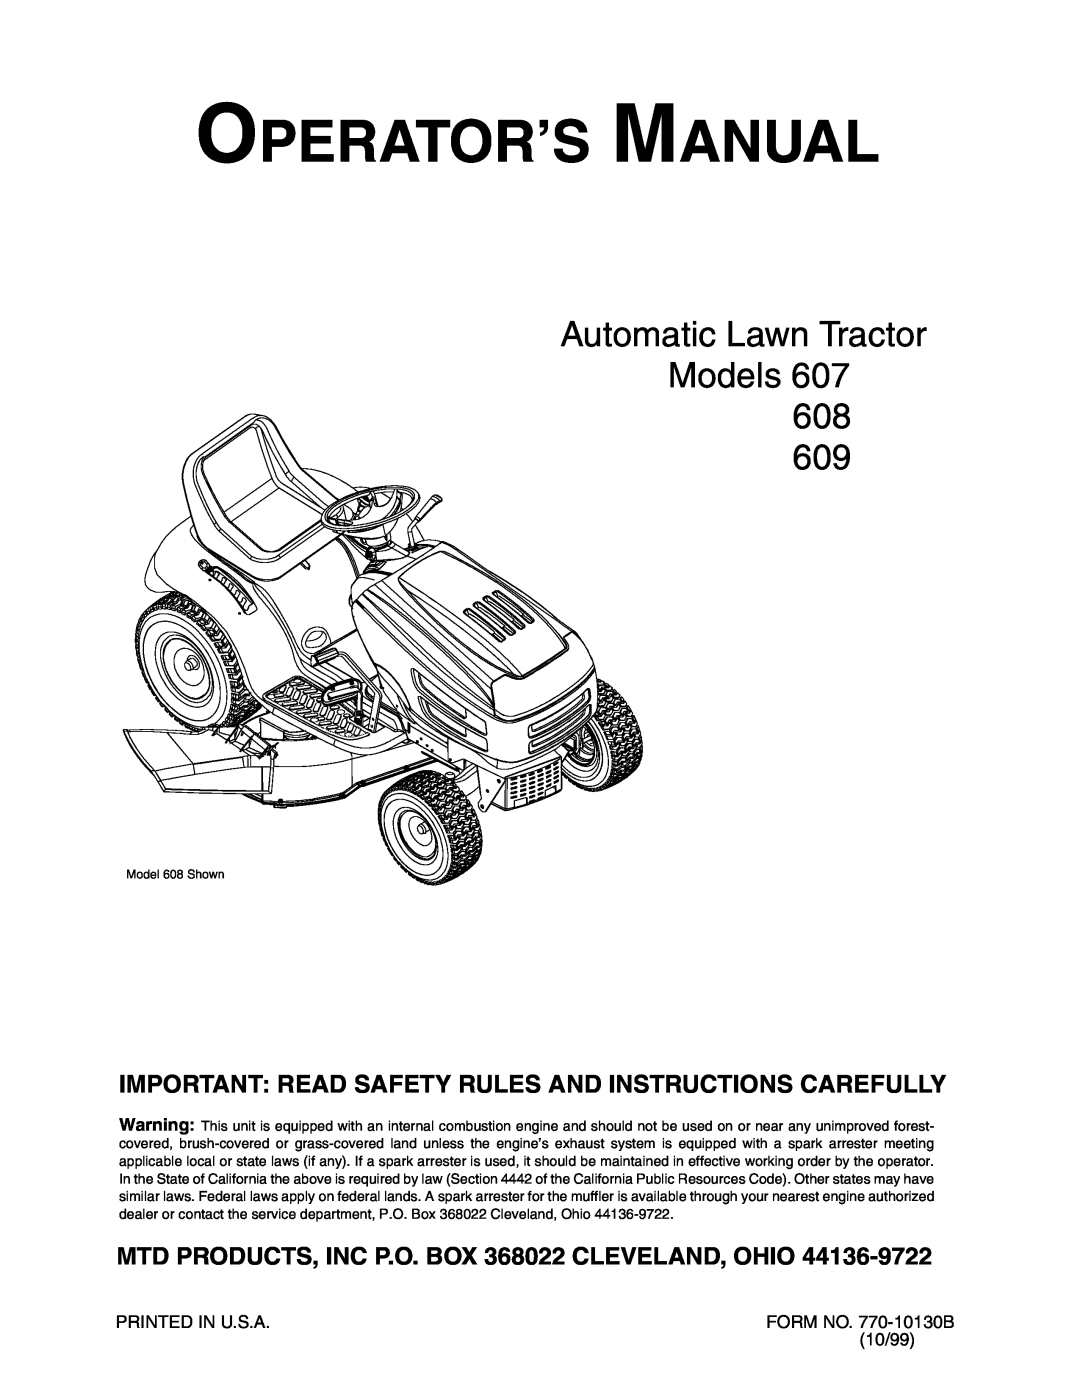 MTD manual Operator’S Manual, Automatic Lawn Tractor Models 608 609, MTD PRODUCTS, INC P.O. BOX 368022 CLEVELAND, OHIO 